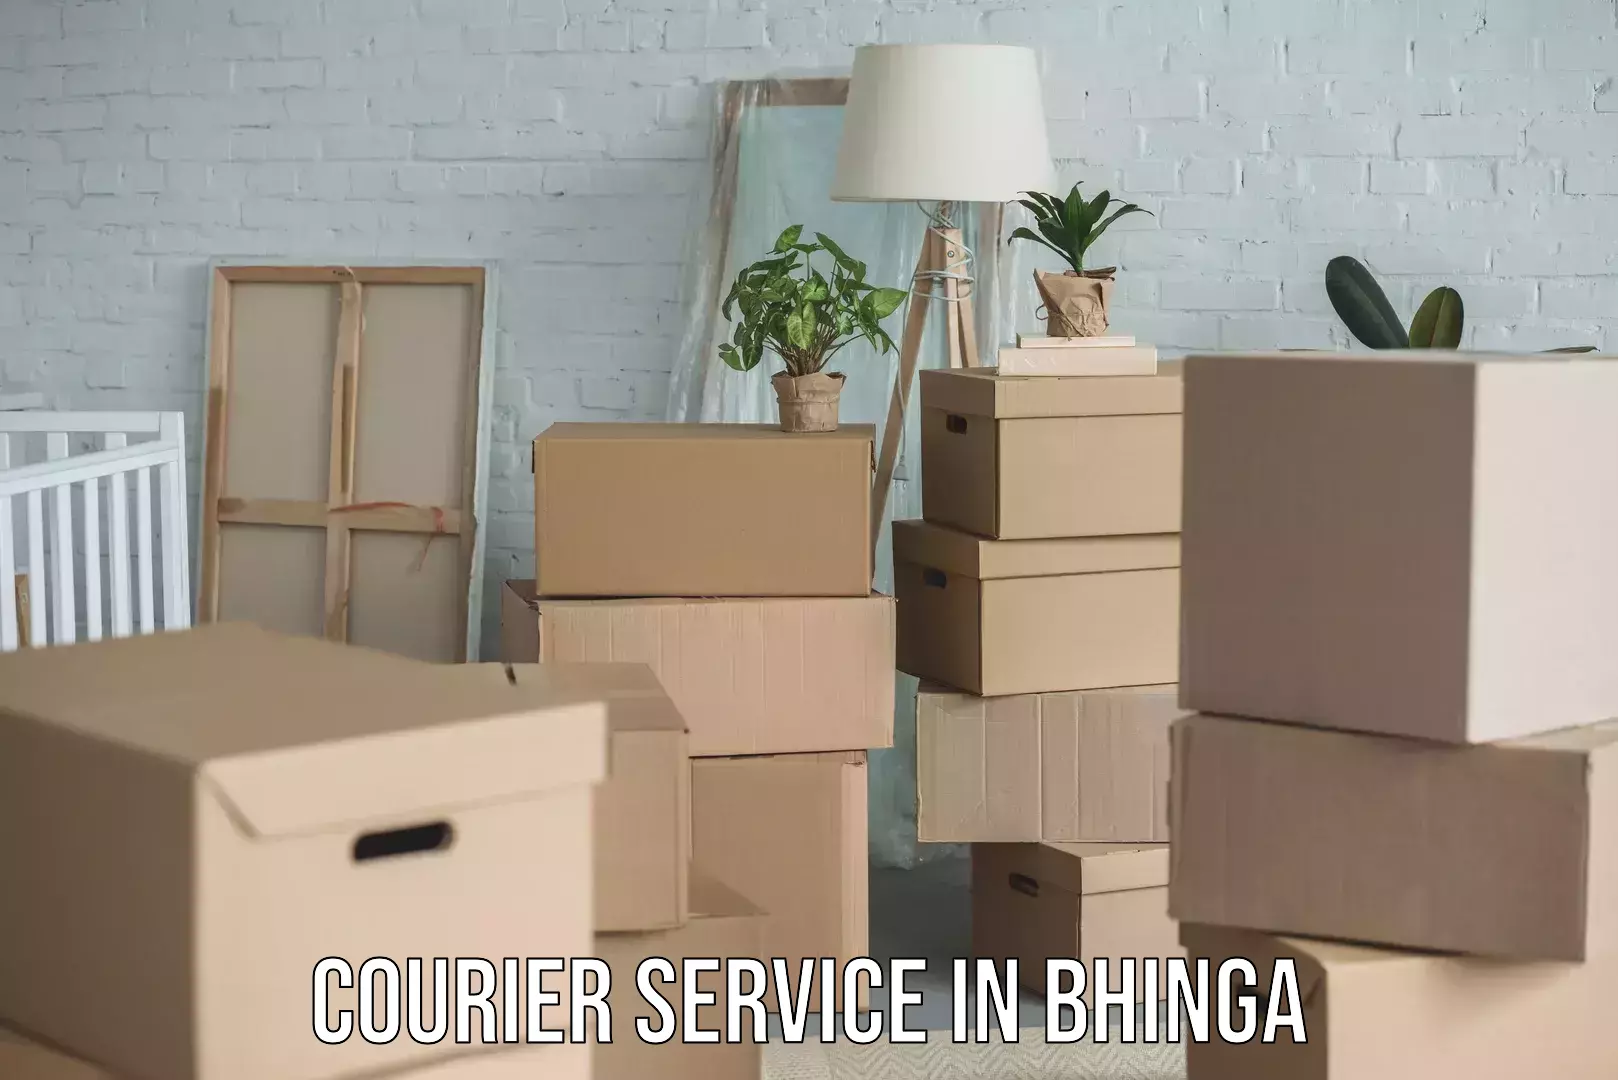 State-of-the-art courier technology in Bhinga